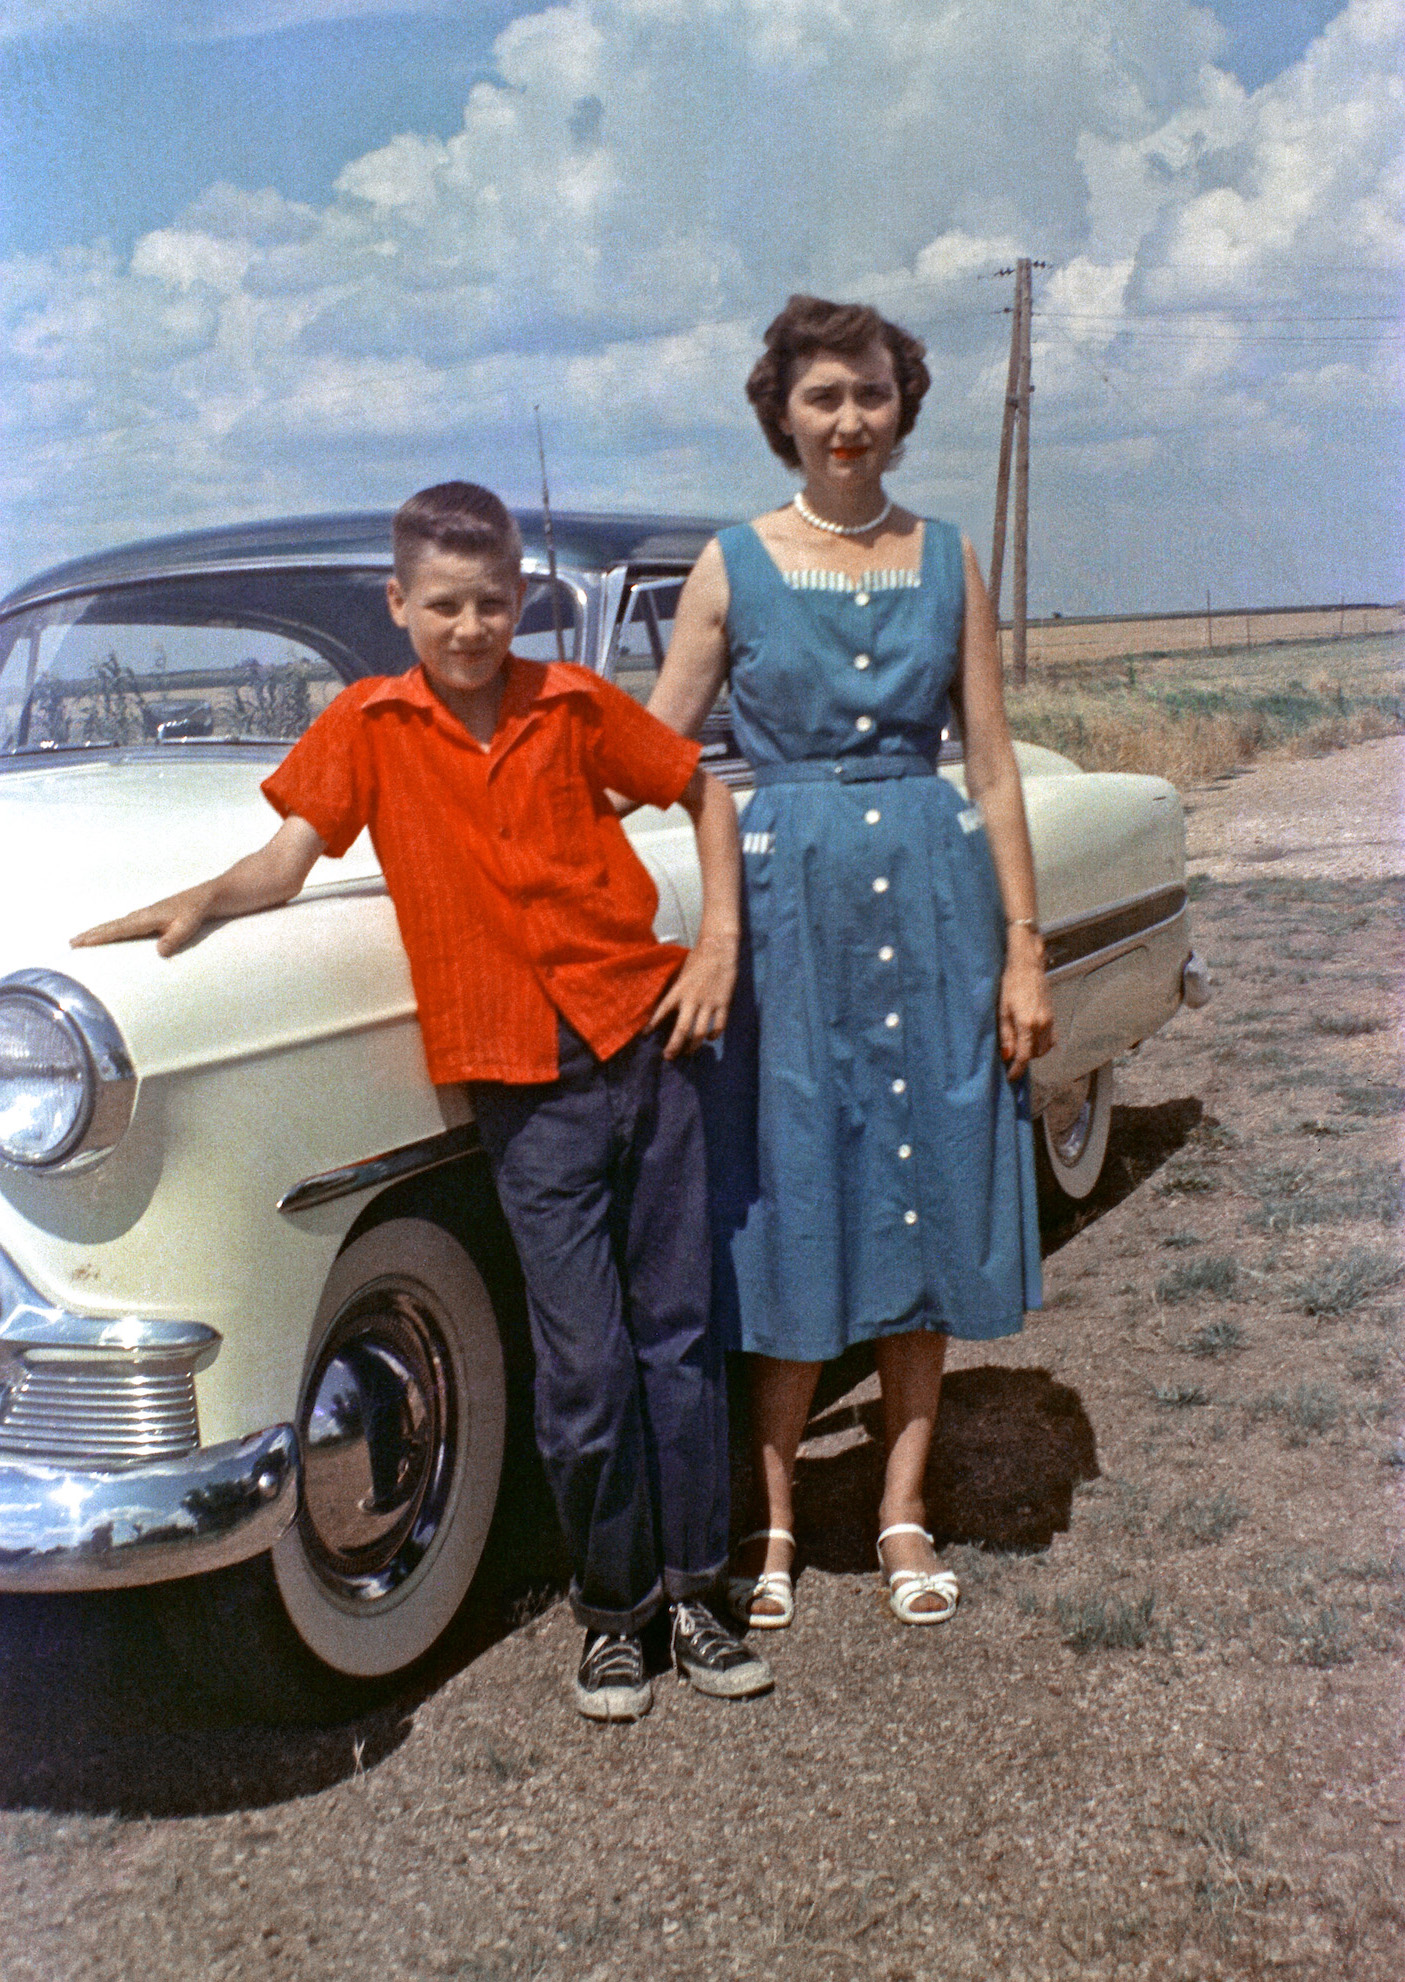 In a box of family photos I found some color negatives that were processed in 1954. This is Willie Mae Smiley (Aunt Jake) and Mike Etheridge, my Uncle Buck, in Parvin, Texas. [Note: the original image as submitted was backwards, so we've now flipped it.] View full size.